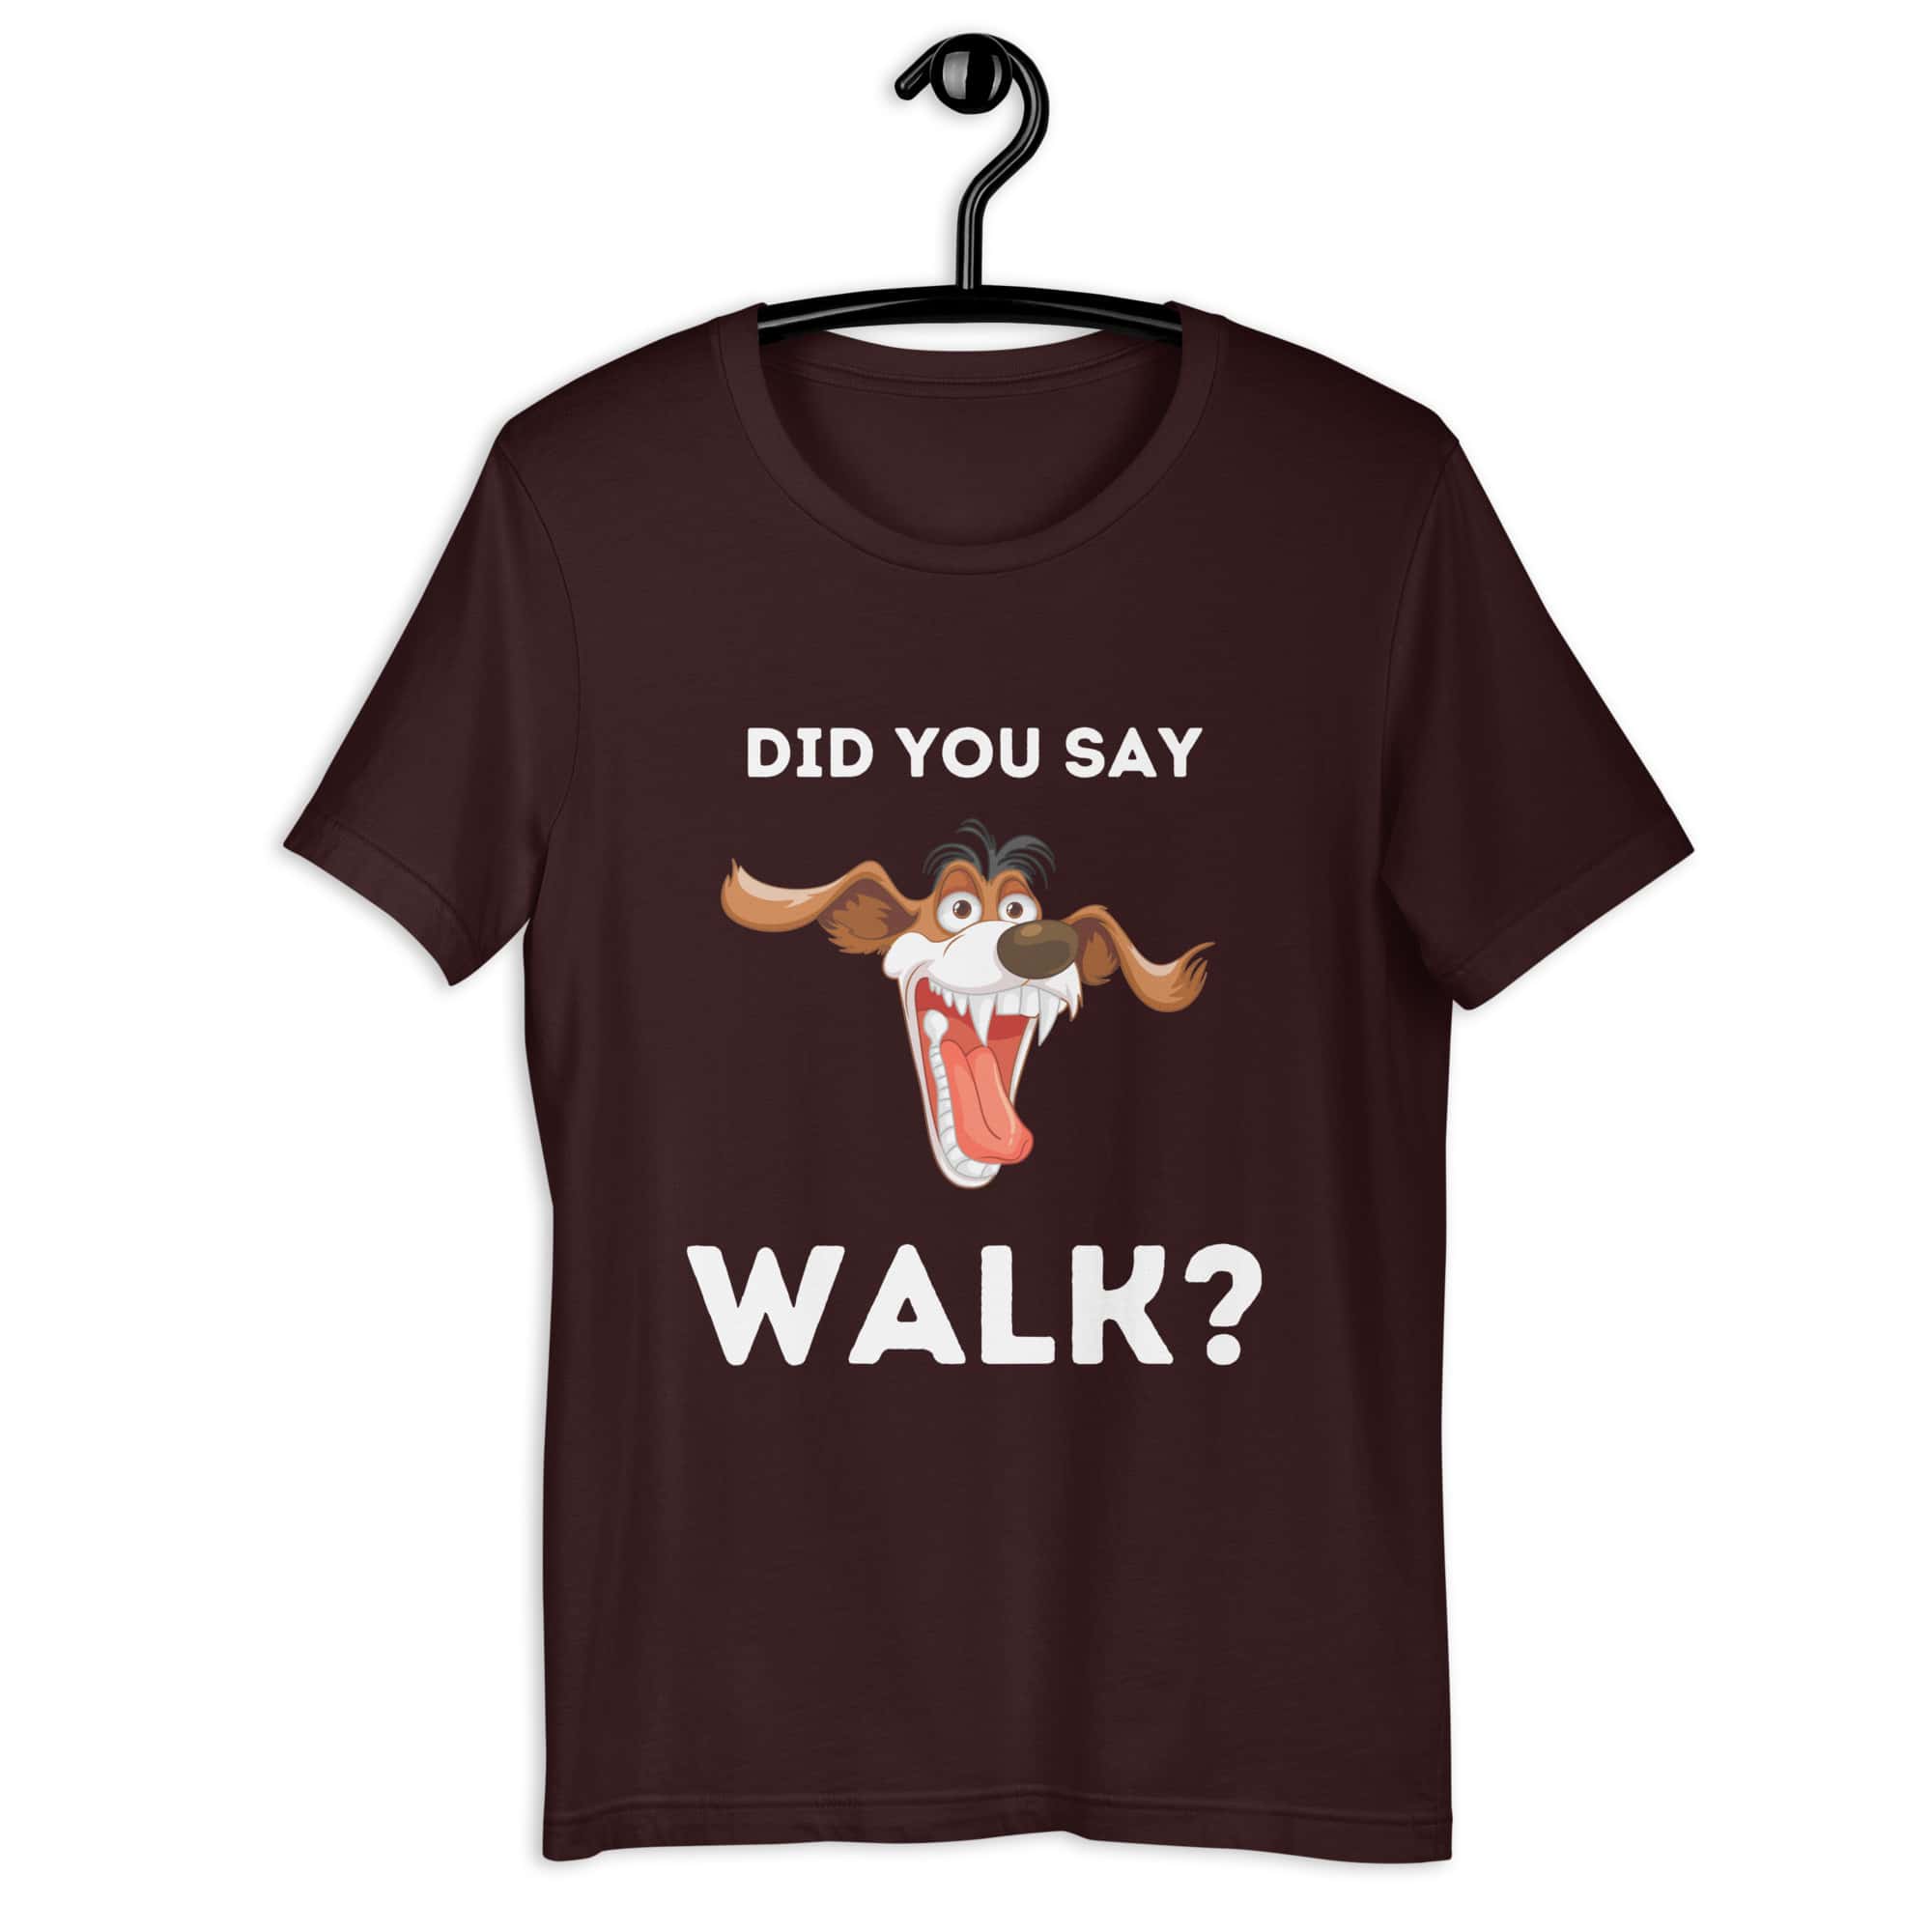 The "Funny 'Did You Say Walk?' Dog Unisex T-Shirt" captures the excitement dogs feel at the mention of a walk. Made from a comfortable, durable blend, it features a vibrant graphic that dog lovers will relate to. Available in various sizes and colors, it's perfect for casual wear, highlighting a universal moment in dog ownership with humor and style. Oxblood Black